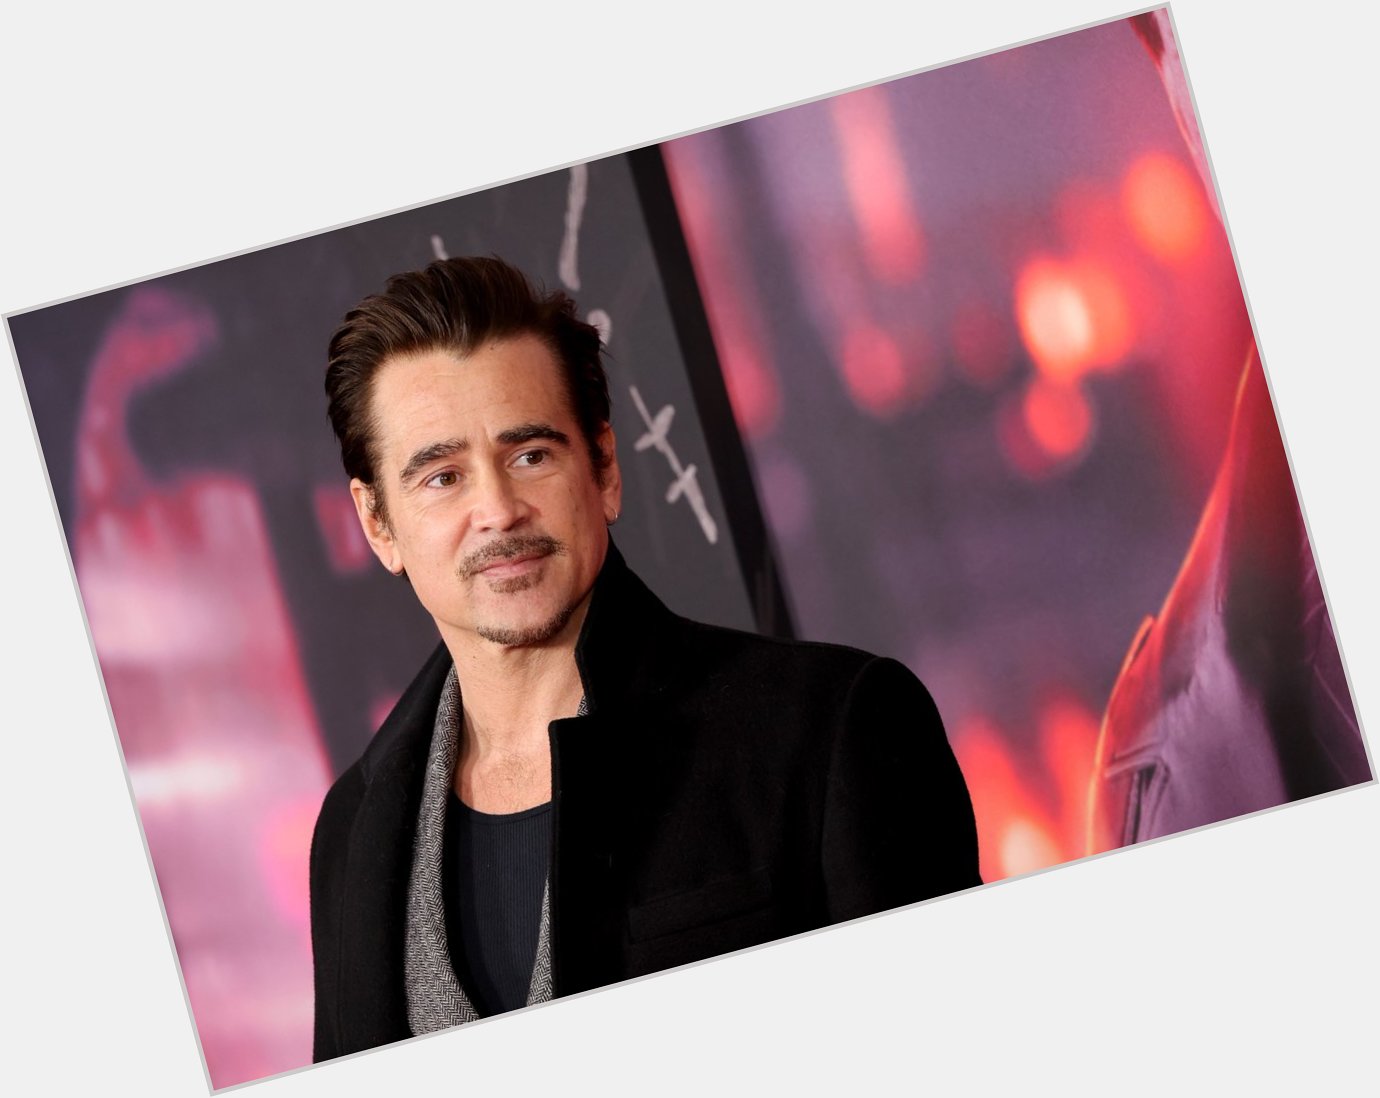 Happy birthday to Colin Farrell who turns 46 today 